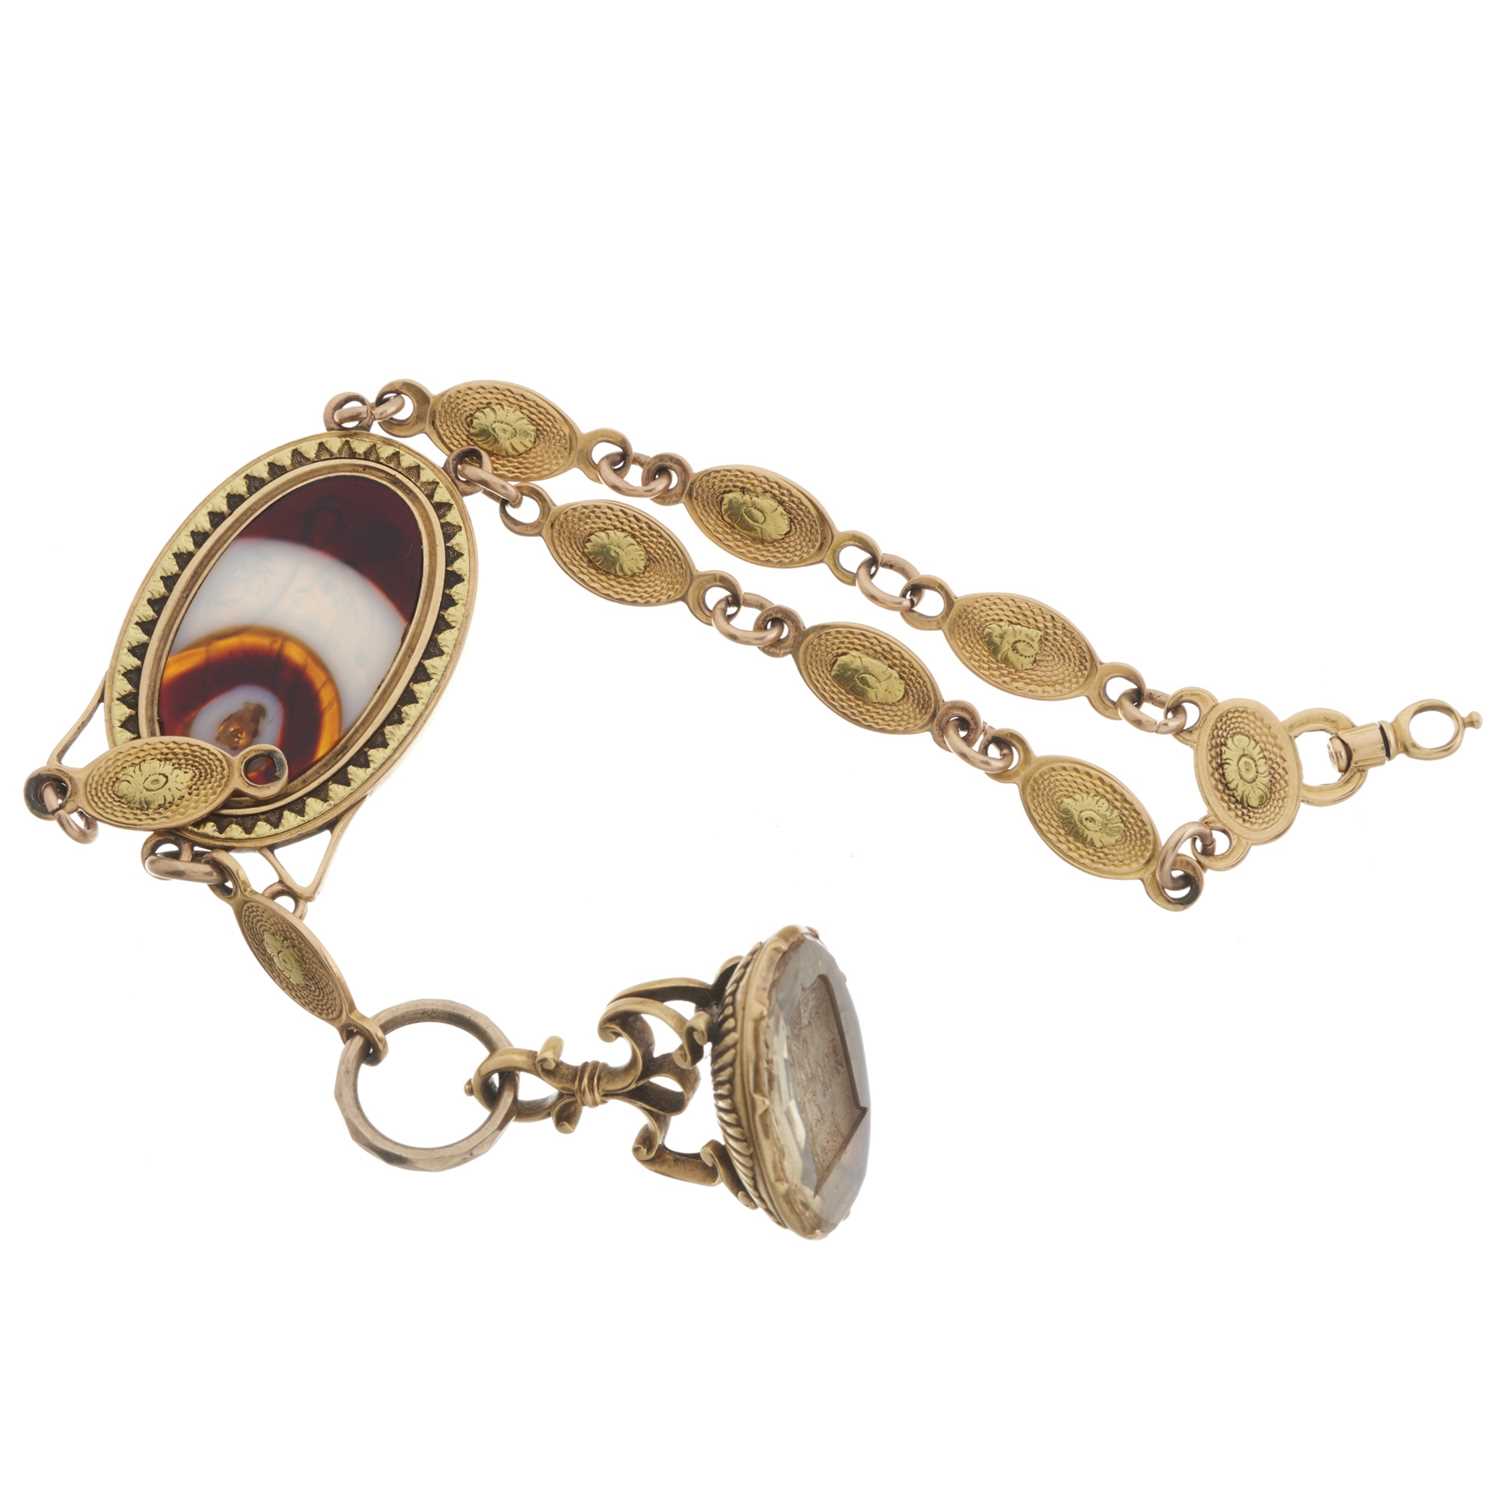 A mid to late 19th century gold agate and citrine intaglio chatelaine - Image 2 of 2